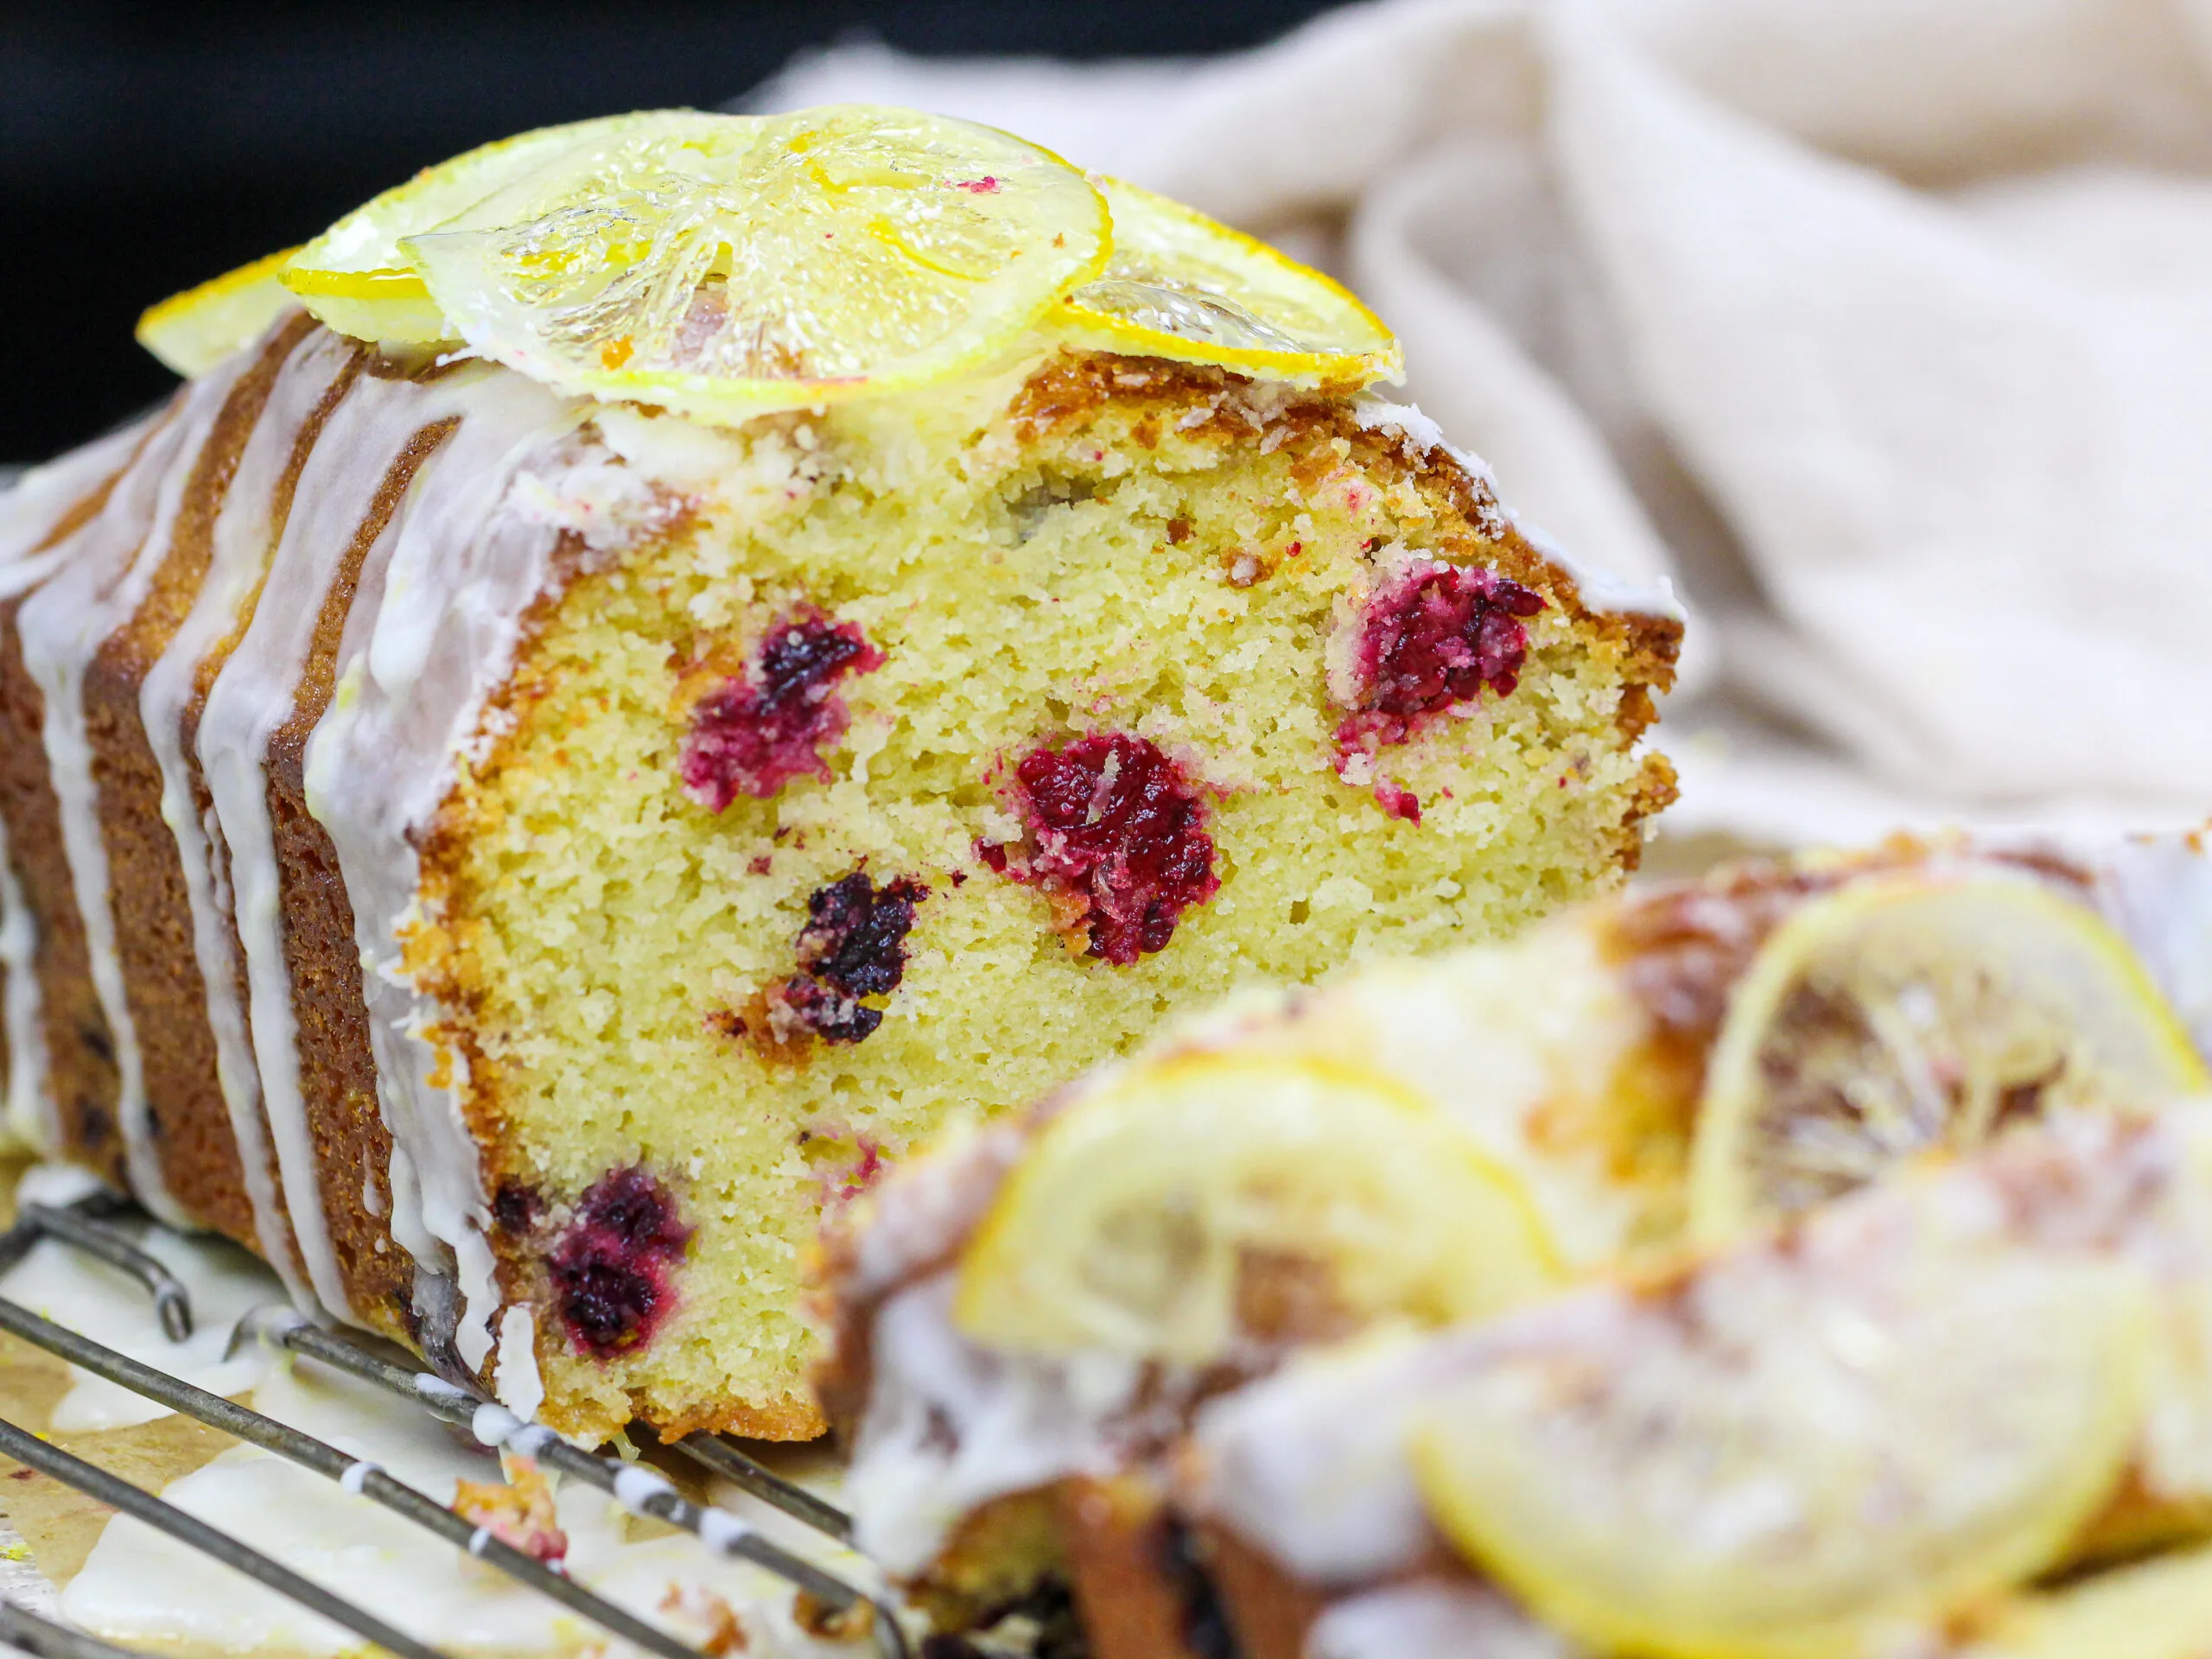 image of a sliced blackberry lemon bread drizzled with lemon glaze and topped with candied lemons